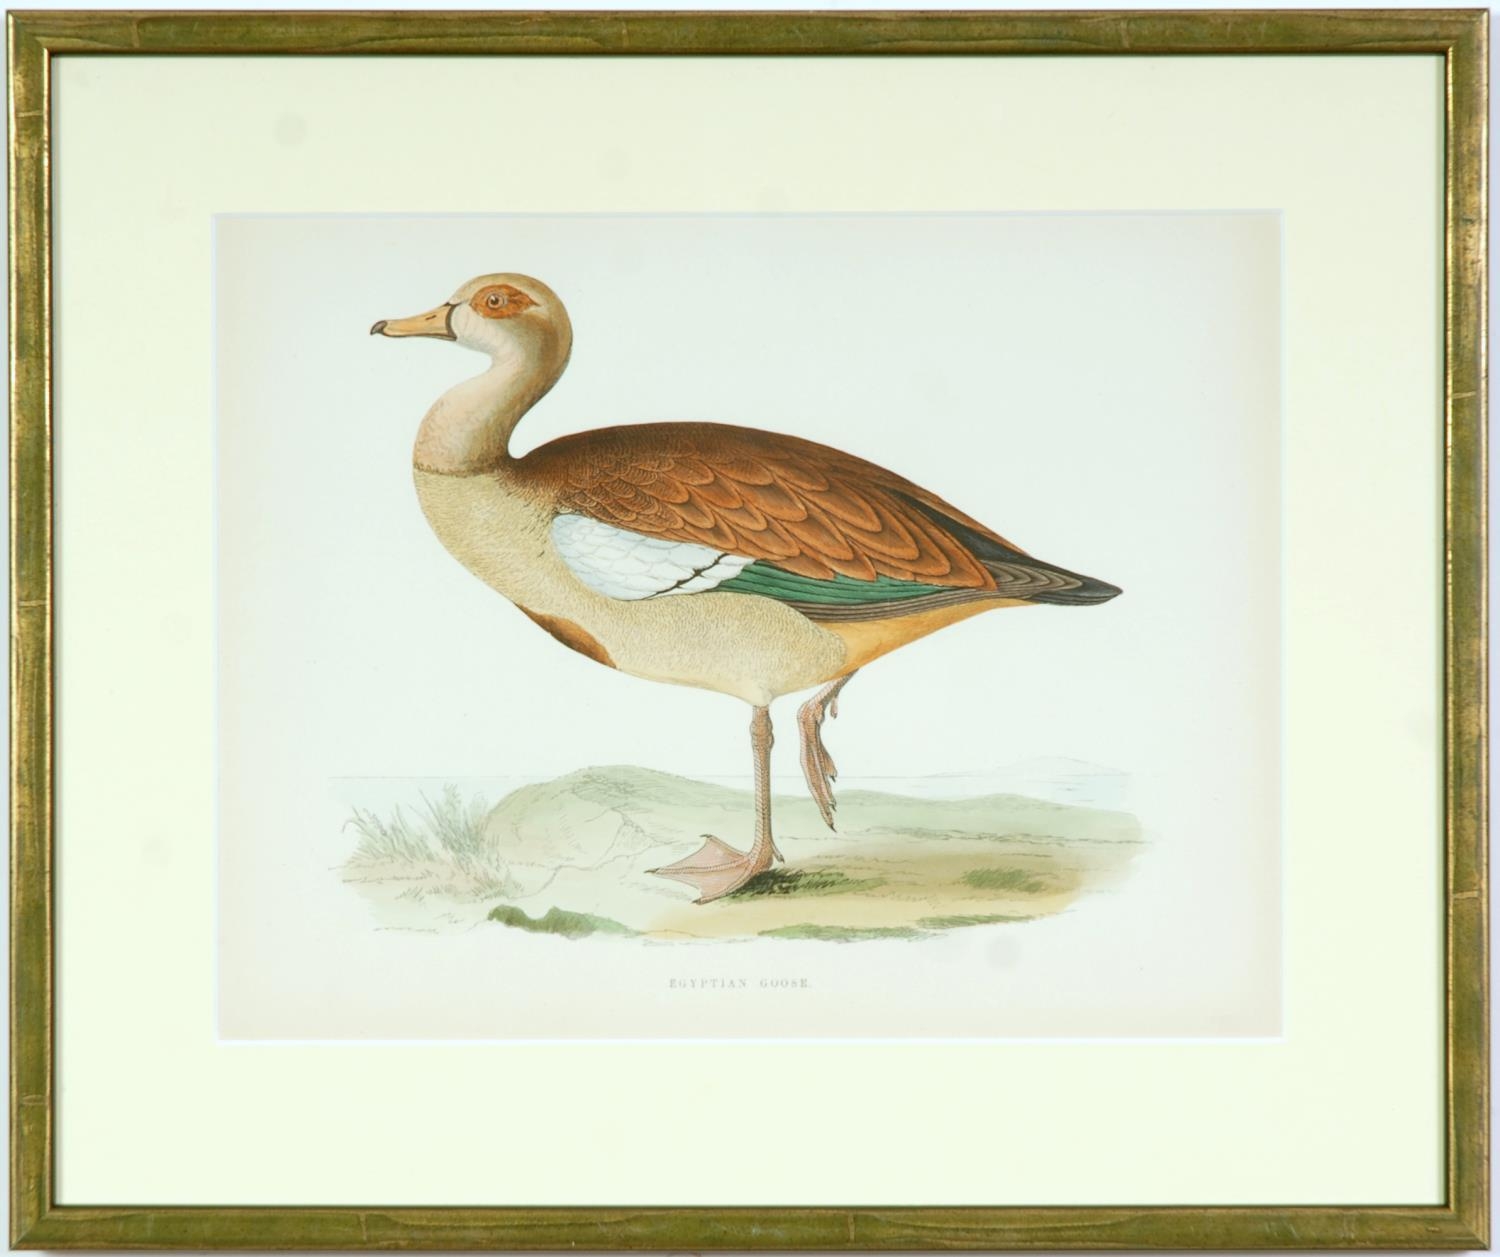 A SET OF FOUR BRITISH GAME SIRDS, swans and geese, handcoloured lithographic plates 1891, Ref: - Image 3 of 5